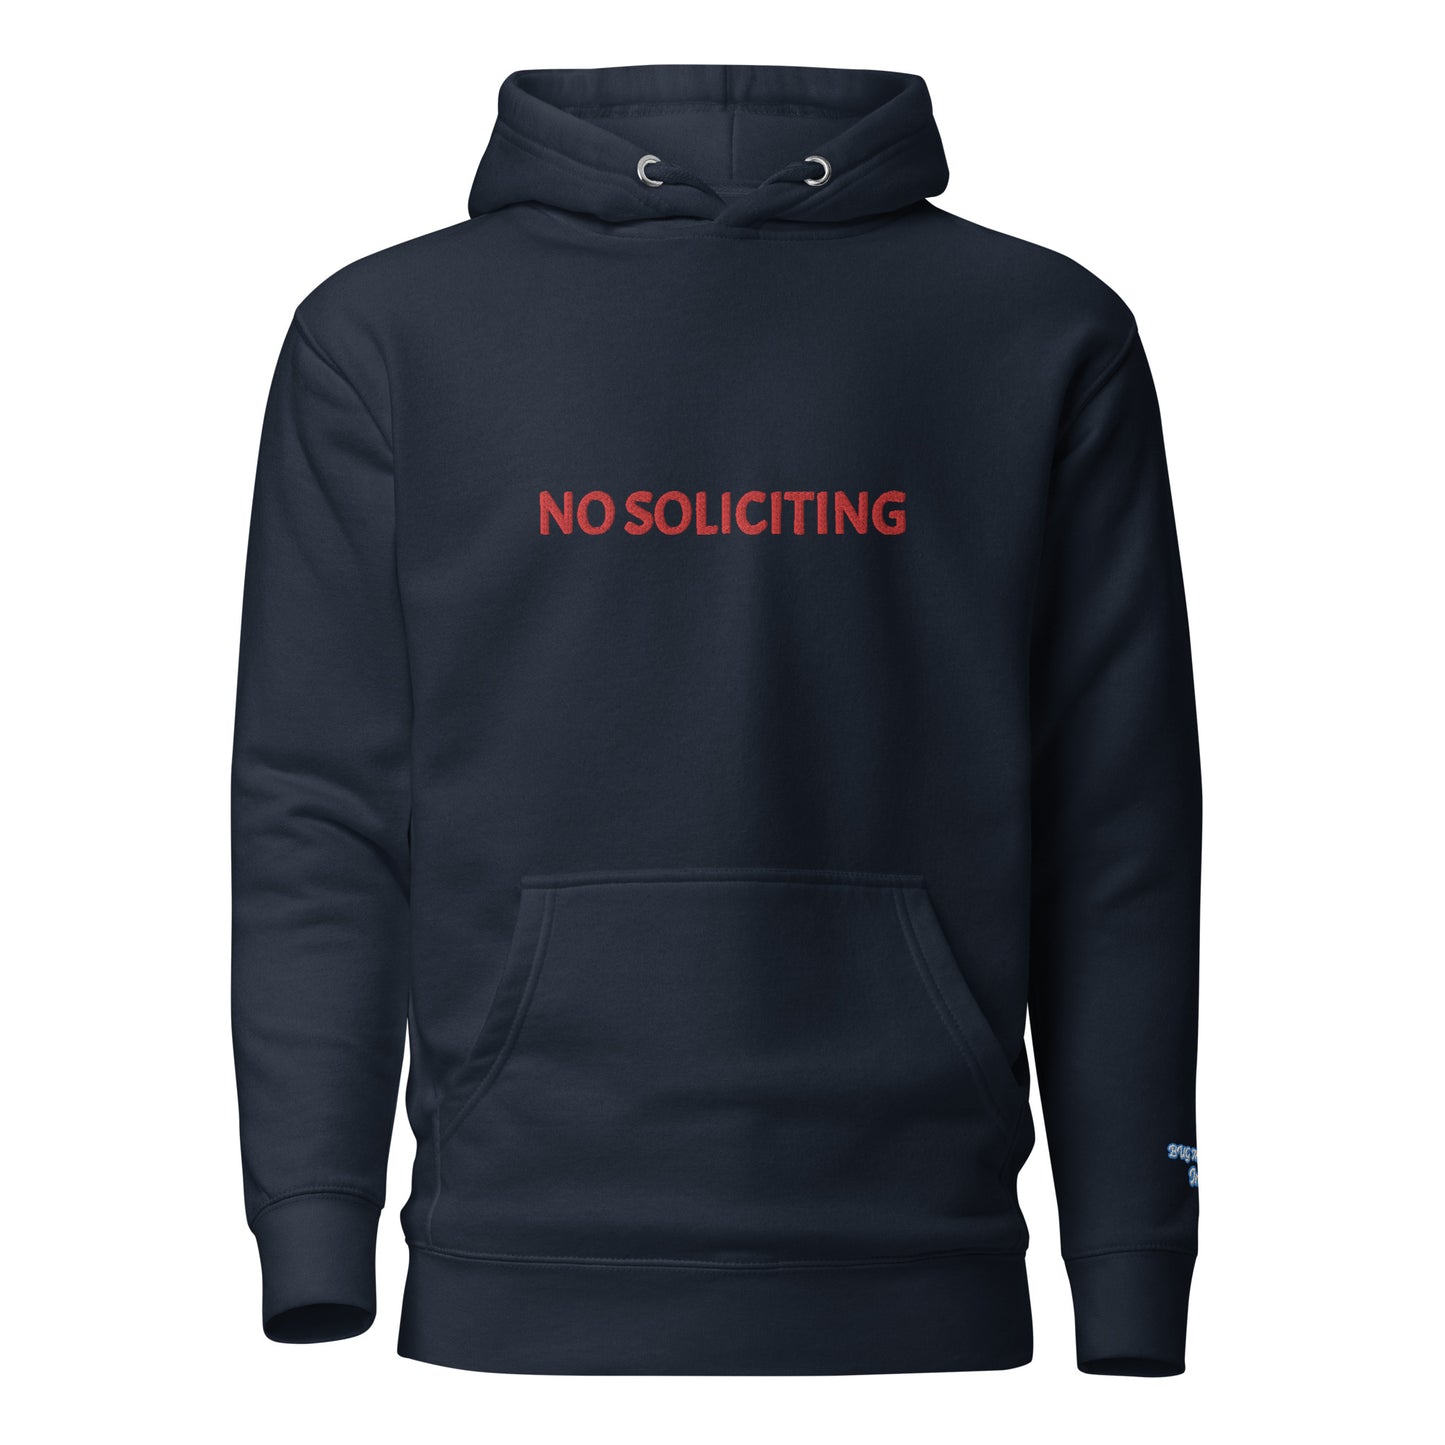 NO SOLICITING Bug Money Inc. Hoodie